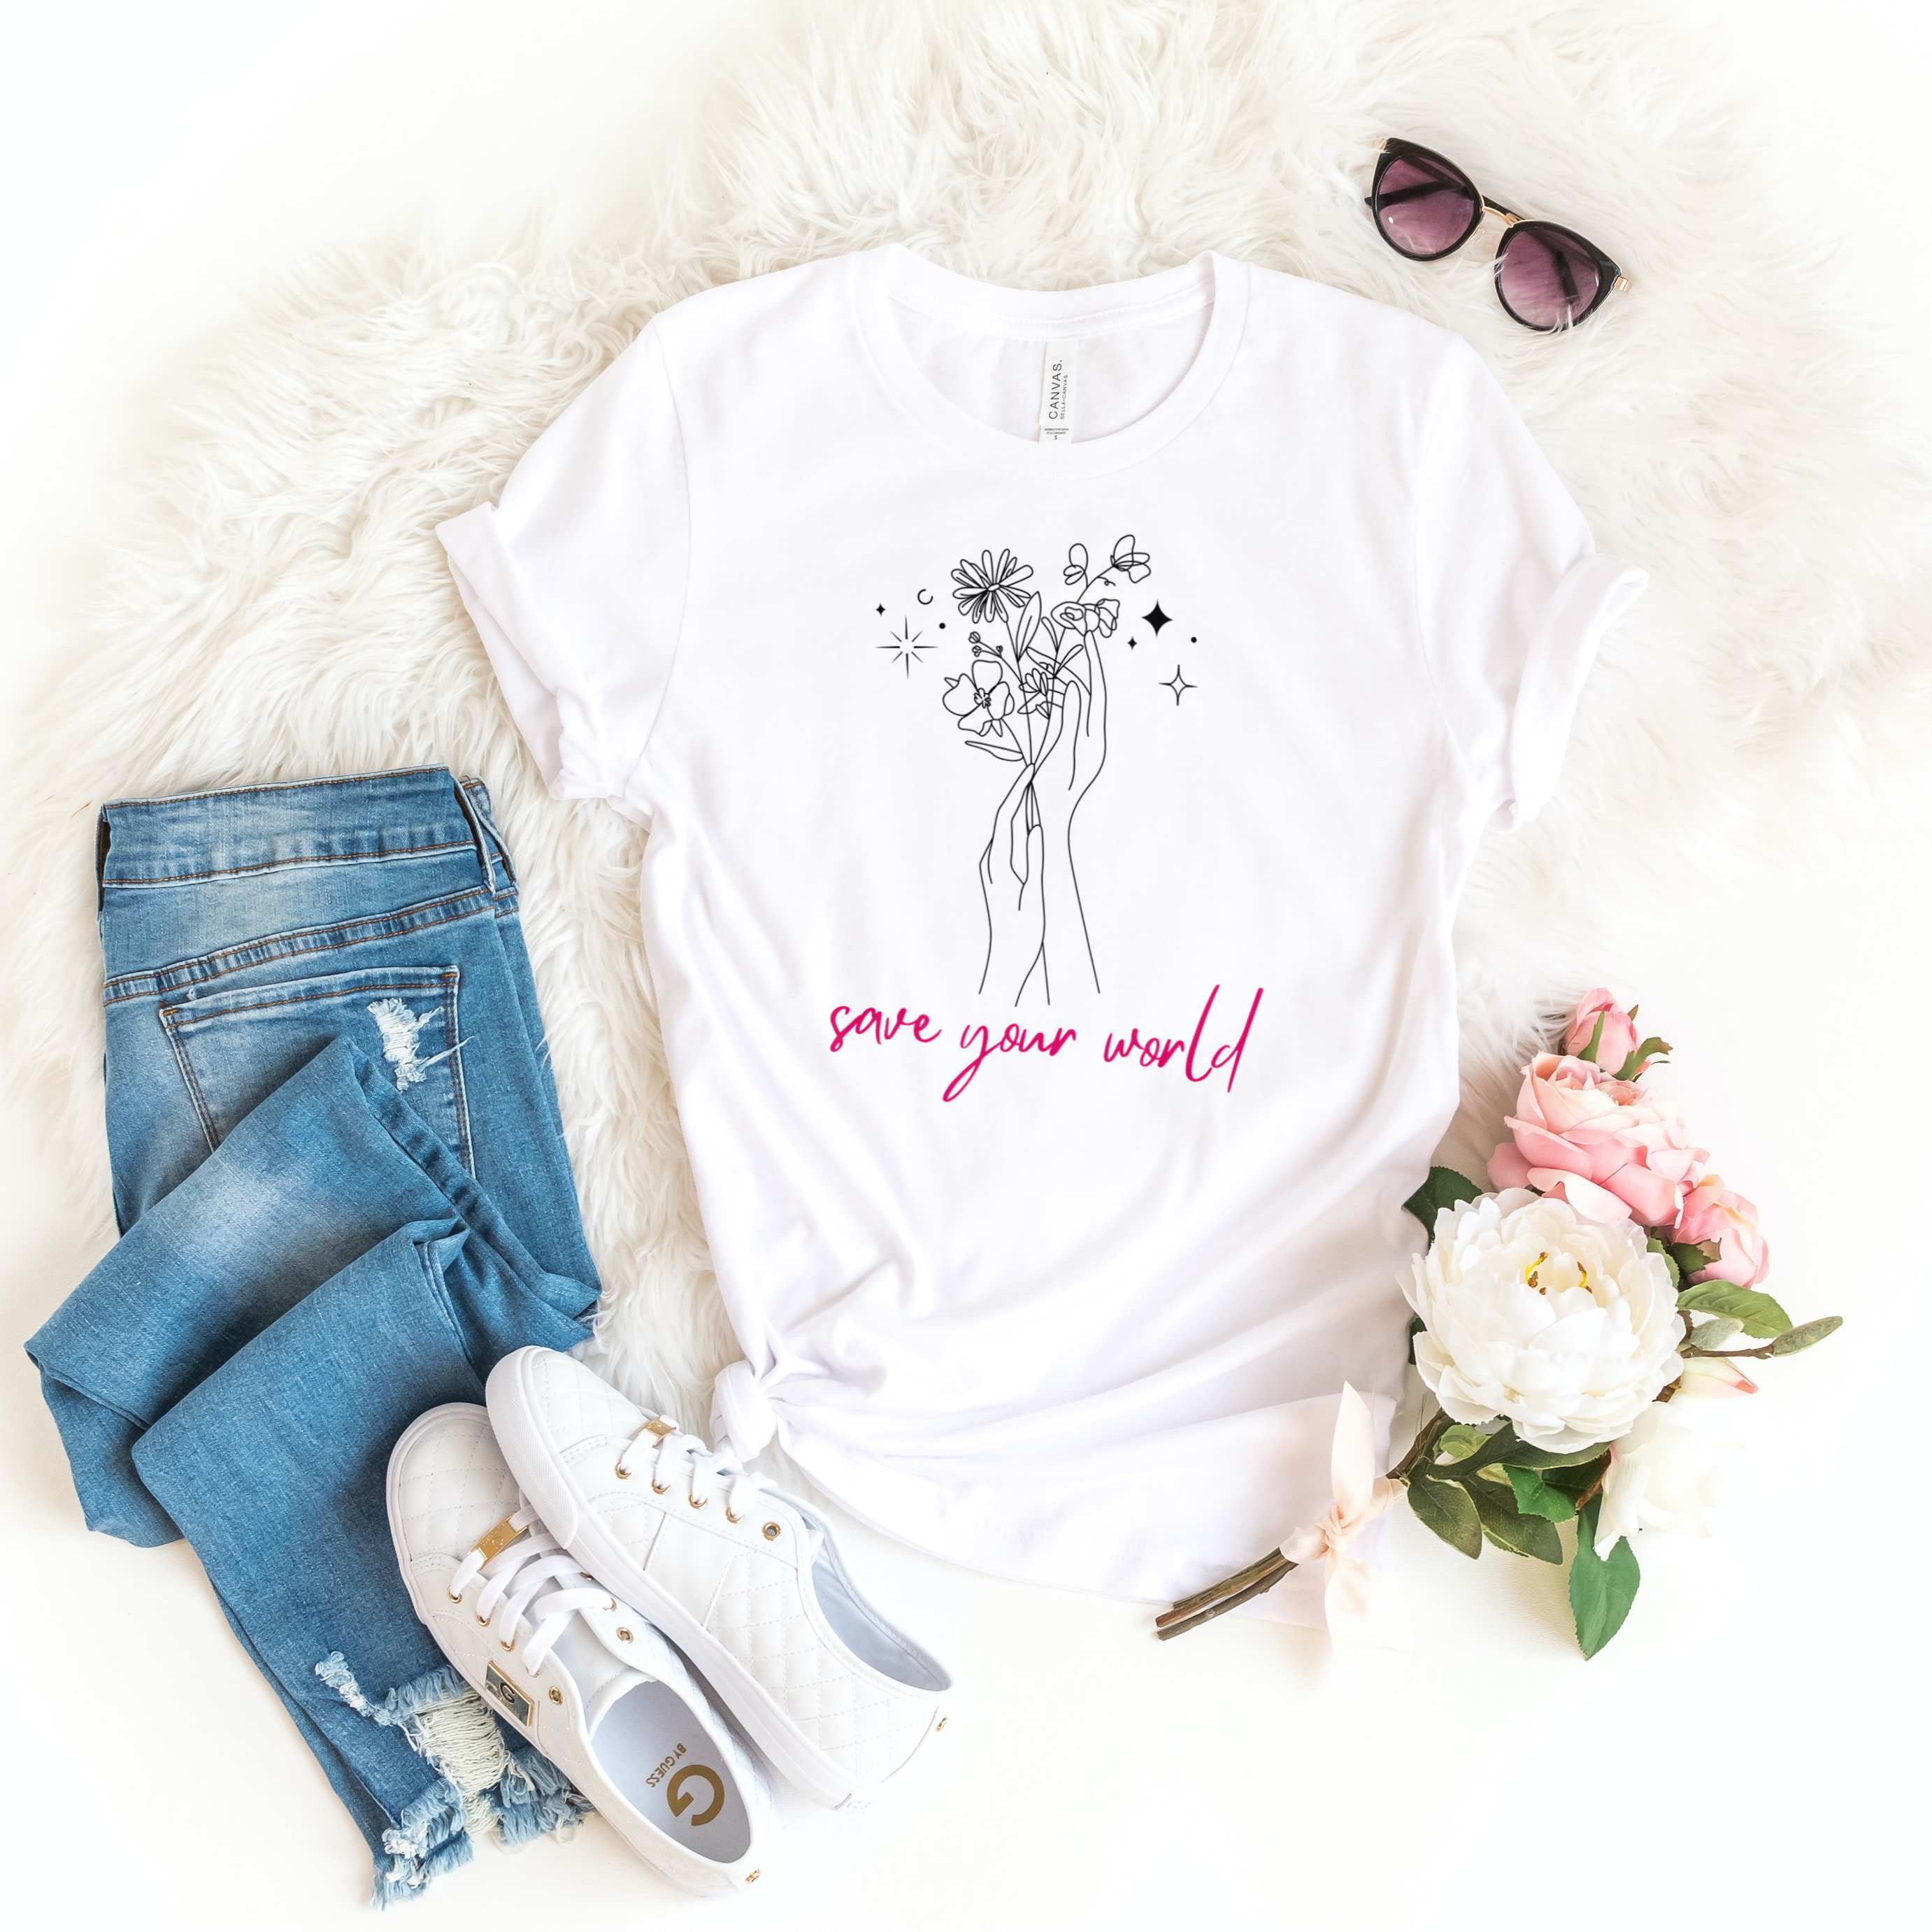 Story of Awakening Lifestyle Community Spirituality Relationships Love Light Meditation Oneness Earth Balance Healing Shop Store Charity Tree Nature Read Write T shirt Tops Tees Clothing Women Horoscope Organic Cotton Save Your World Flowers Quote